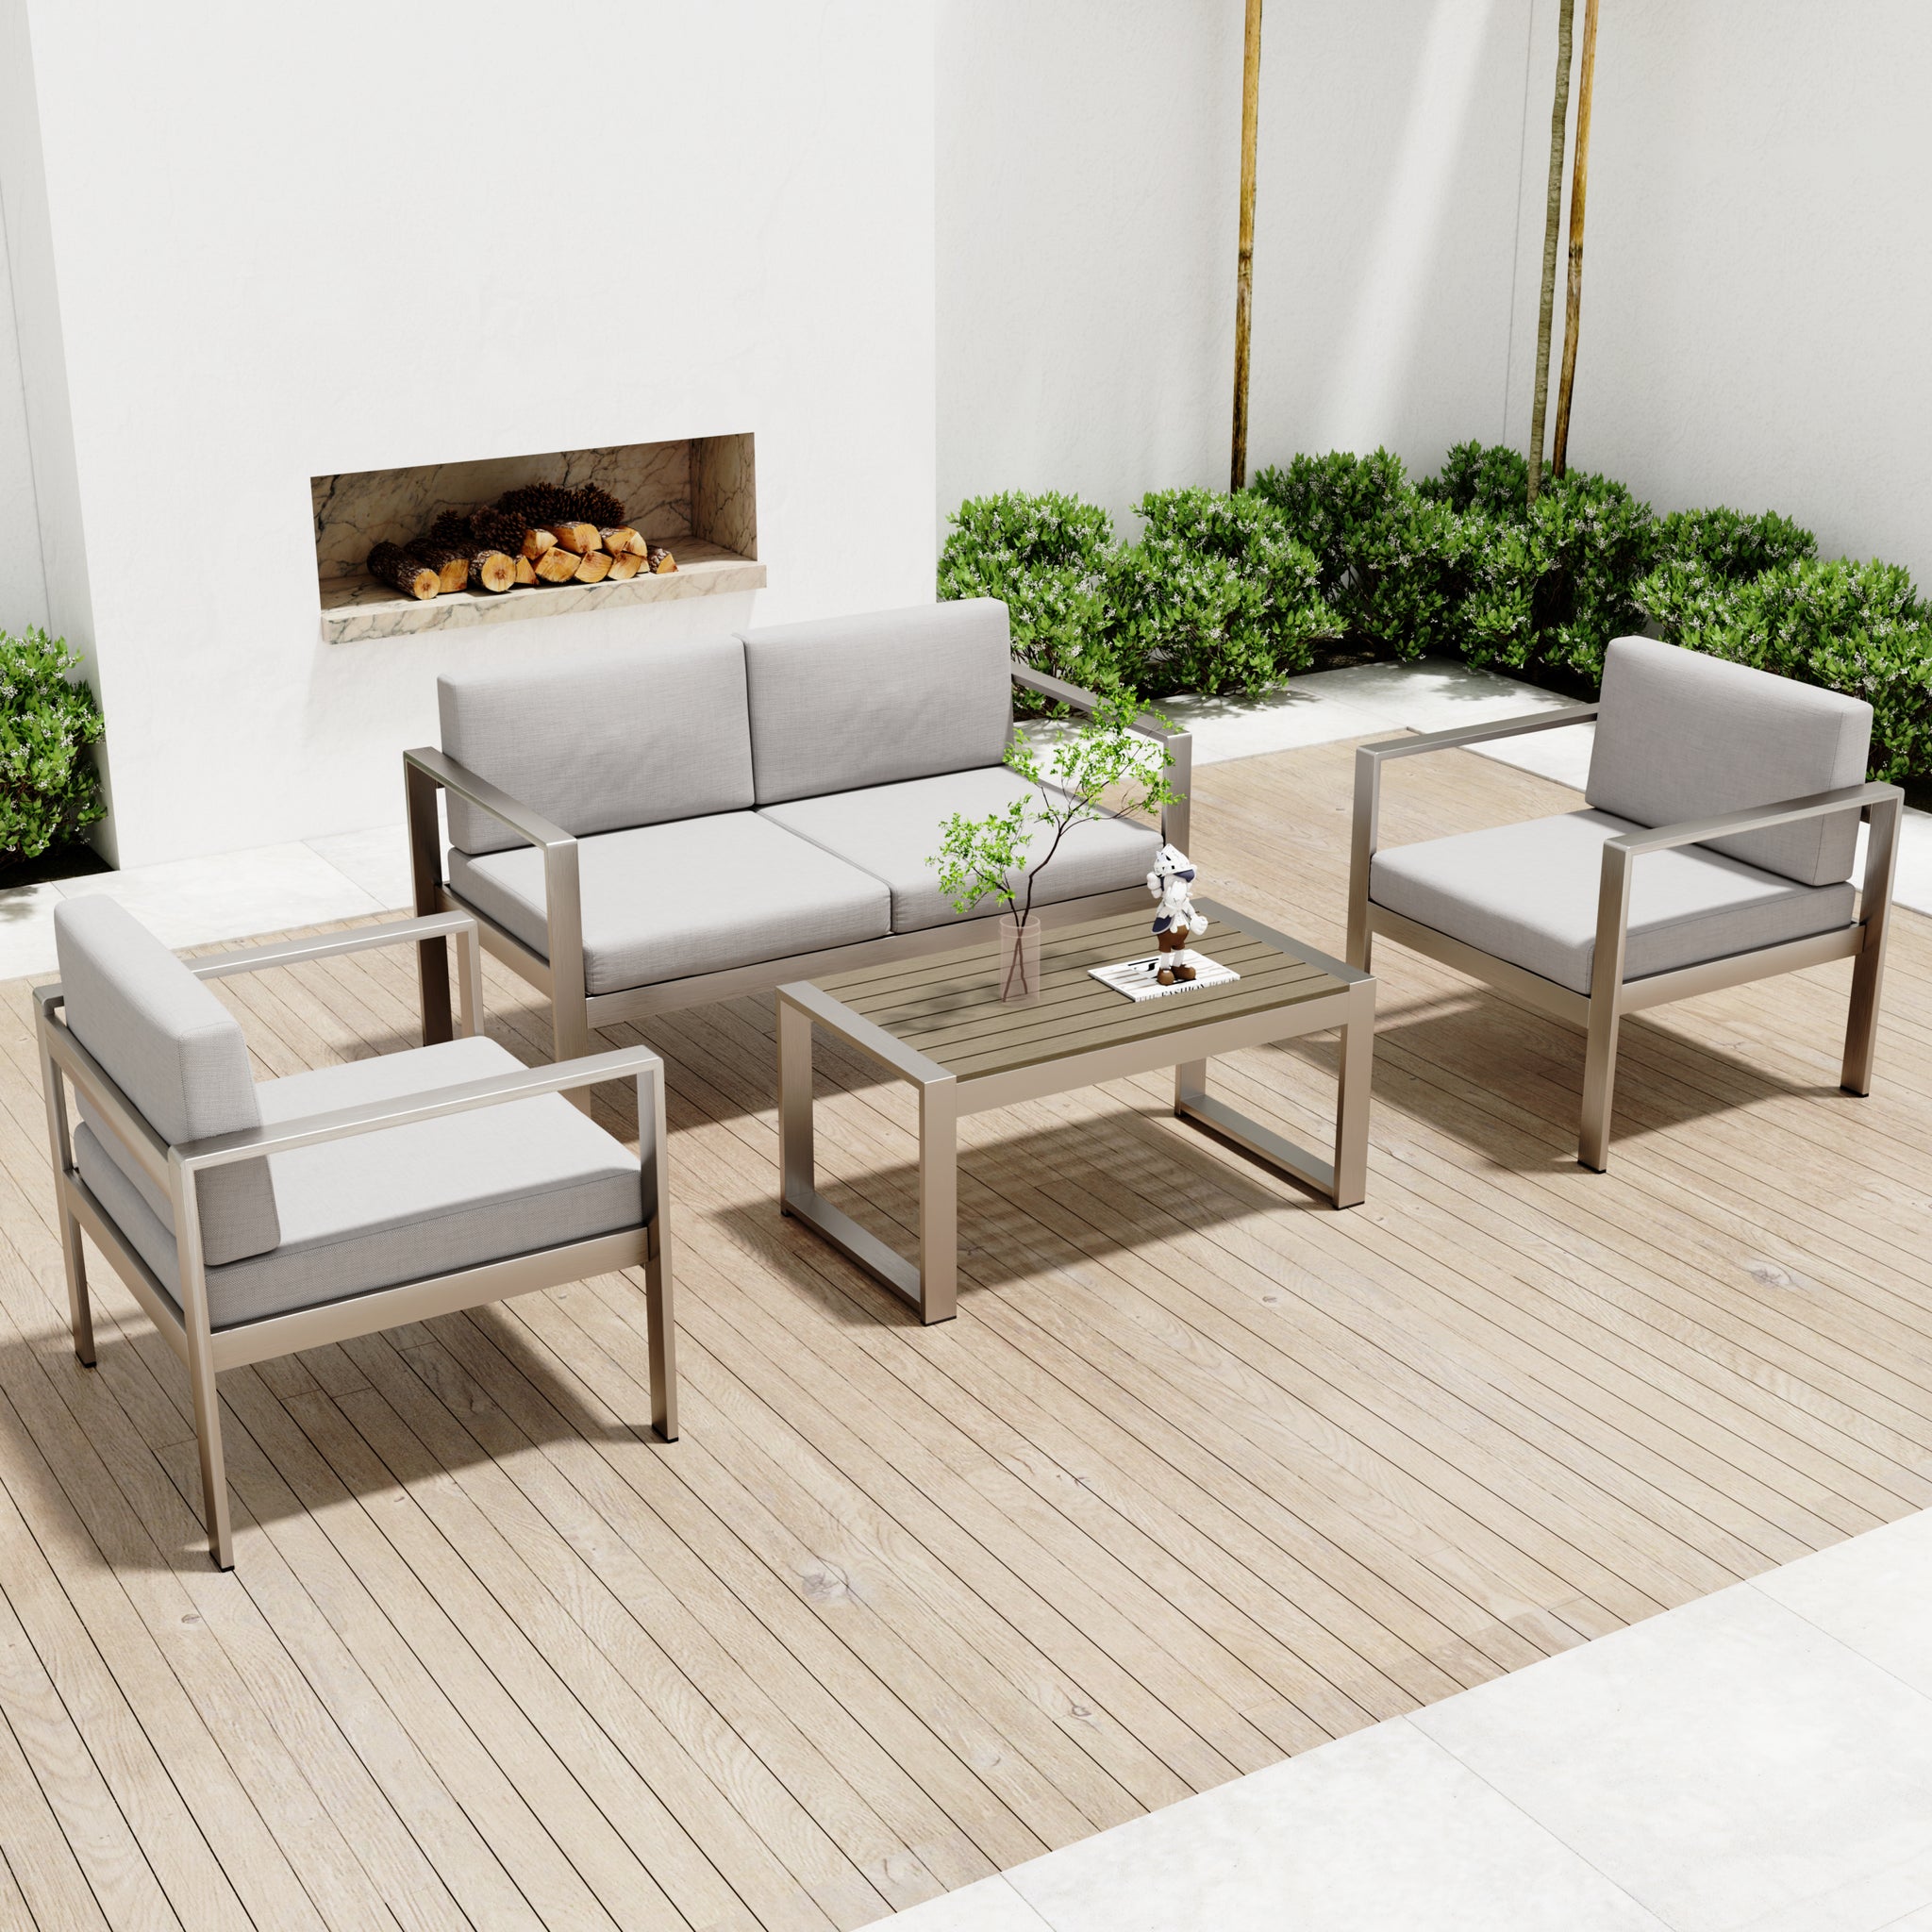 Aluminum Modern 4 Piece Sofa Seating Group For Patio yes-complete patio set-gray+silver-mildew